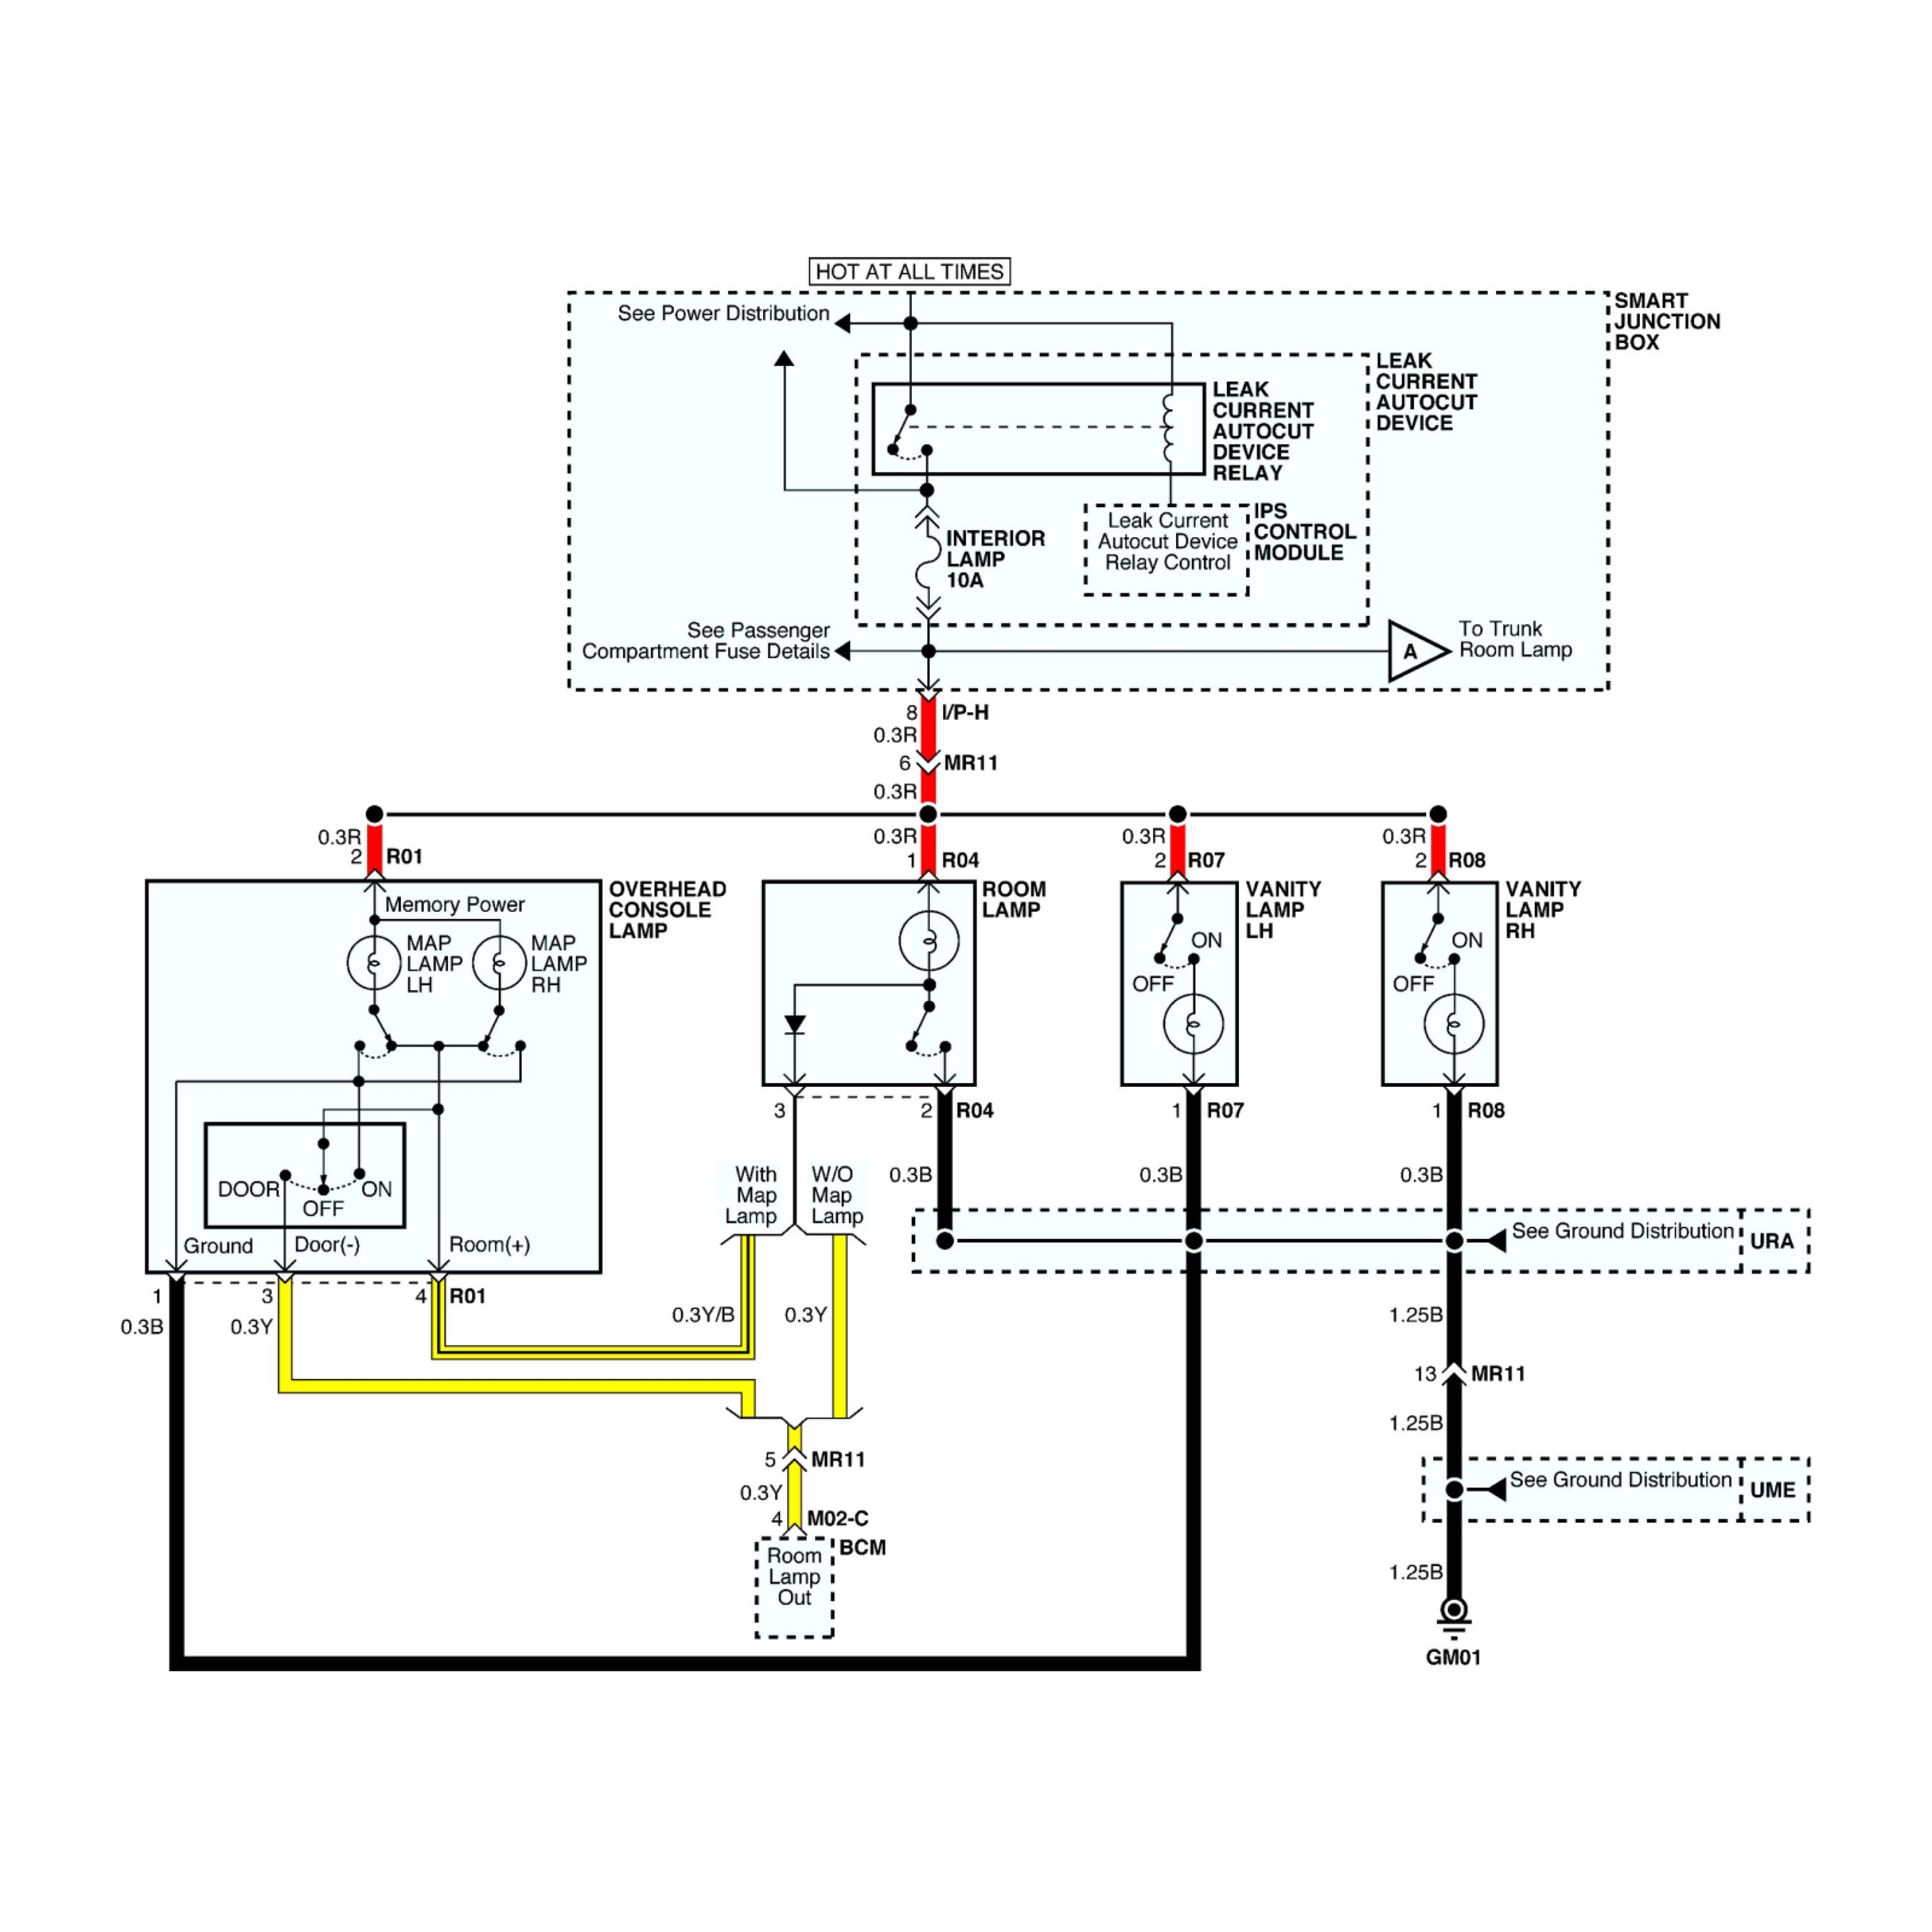 2015 BMW M6 wiring diagrams example